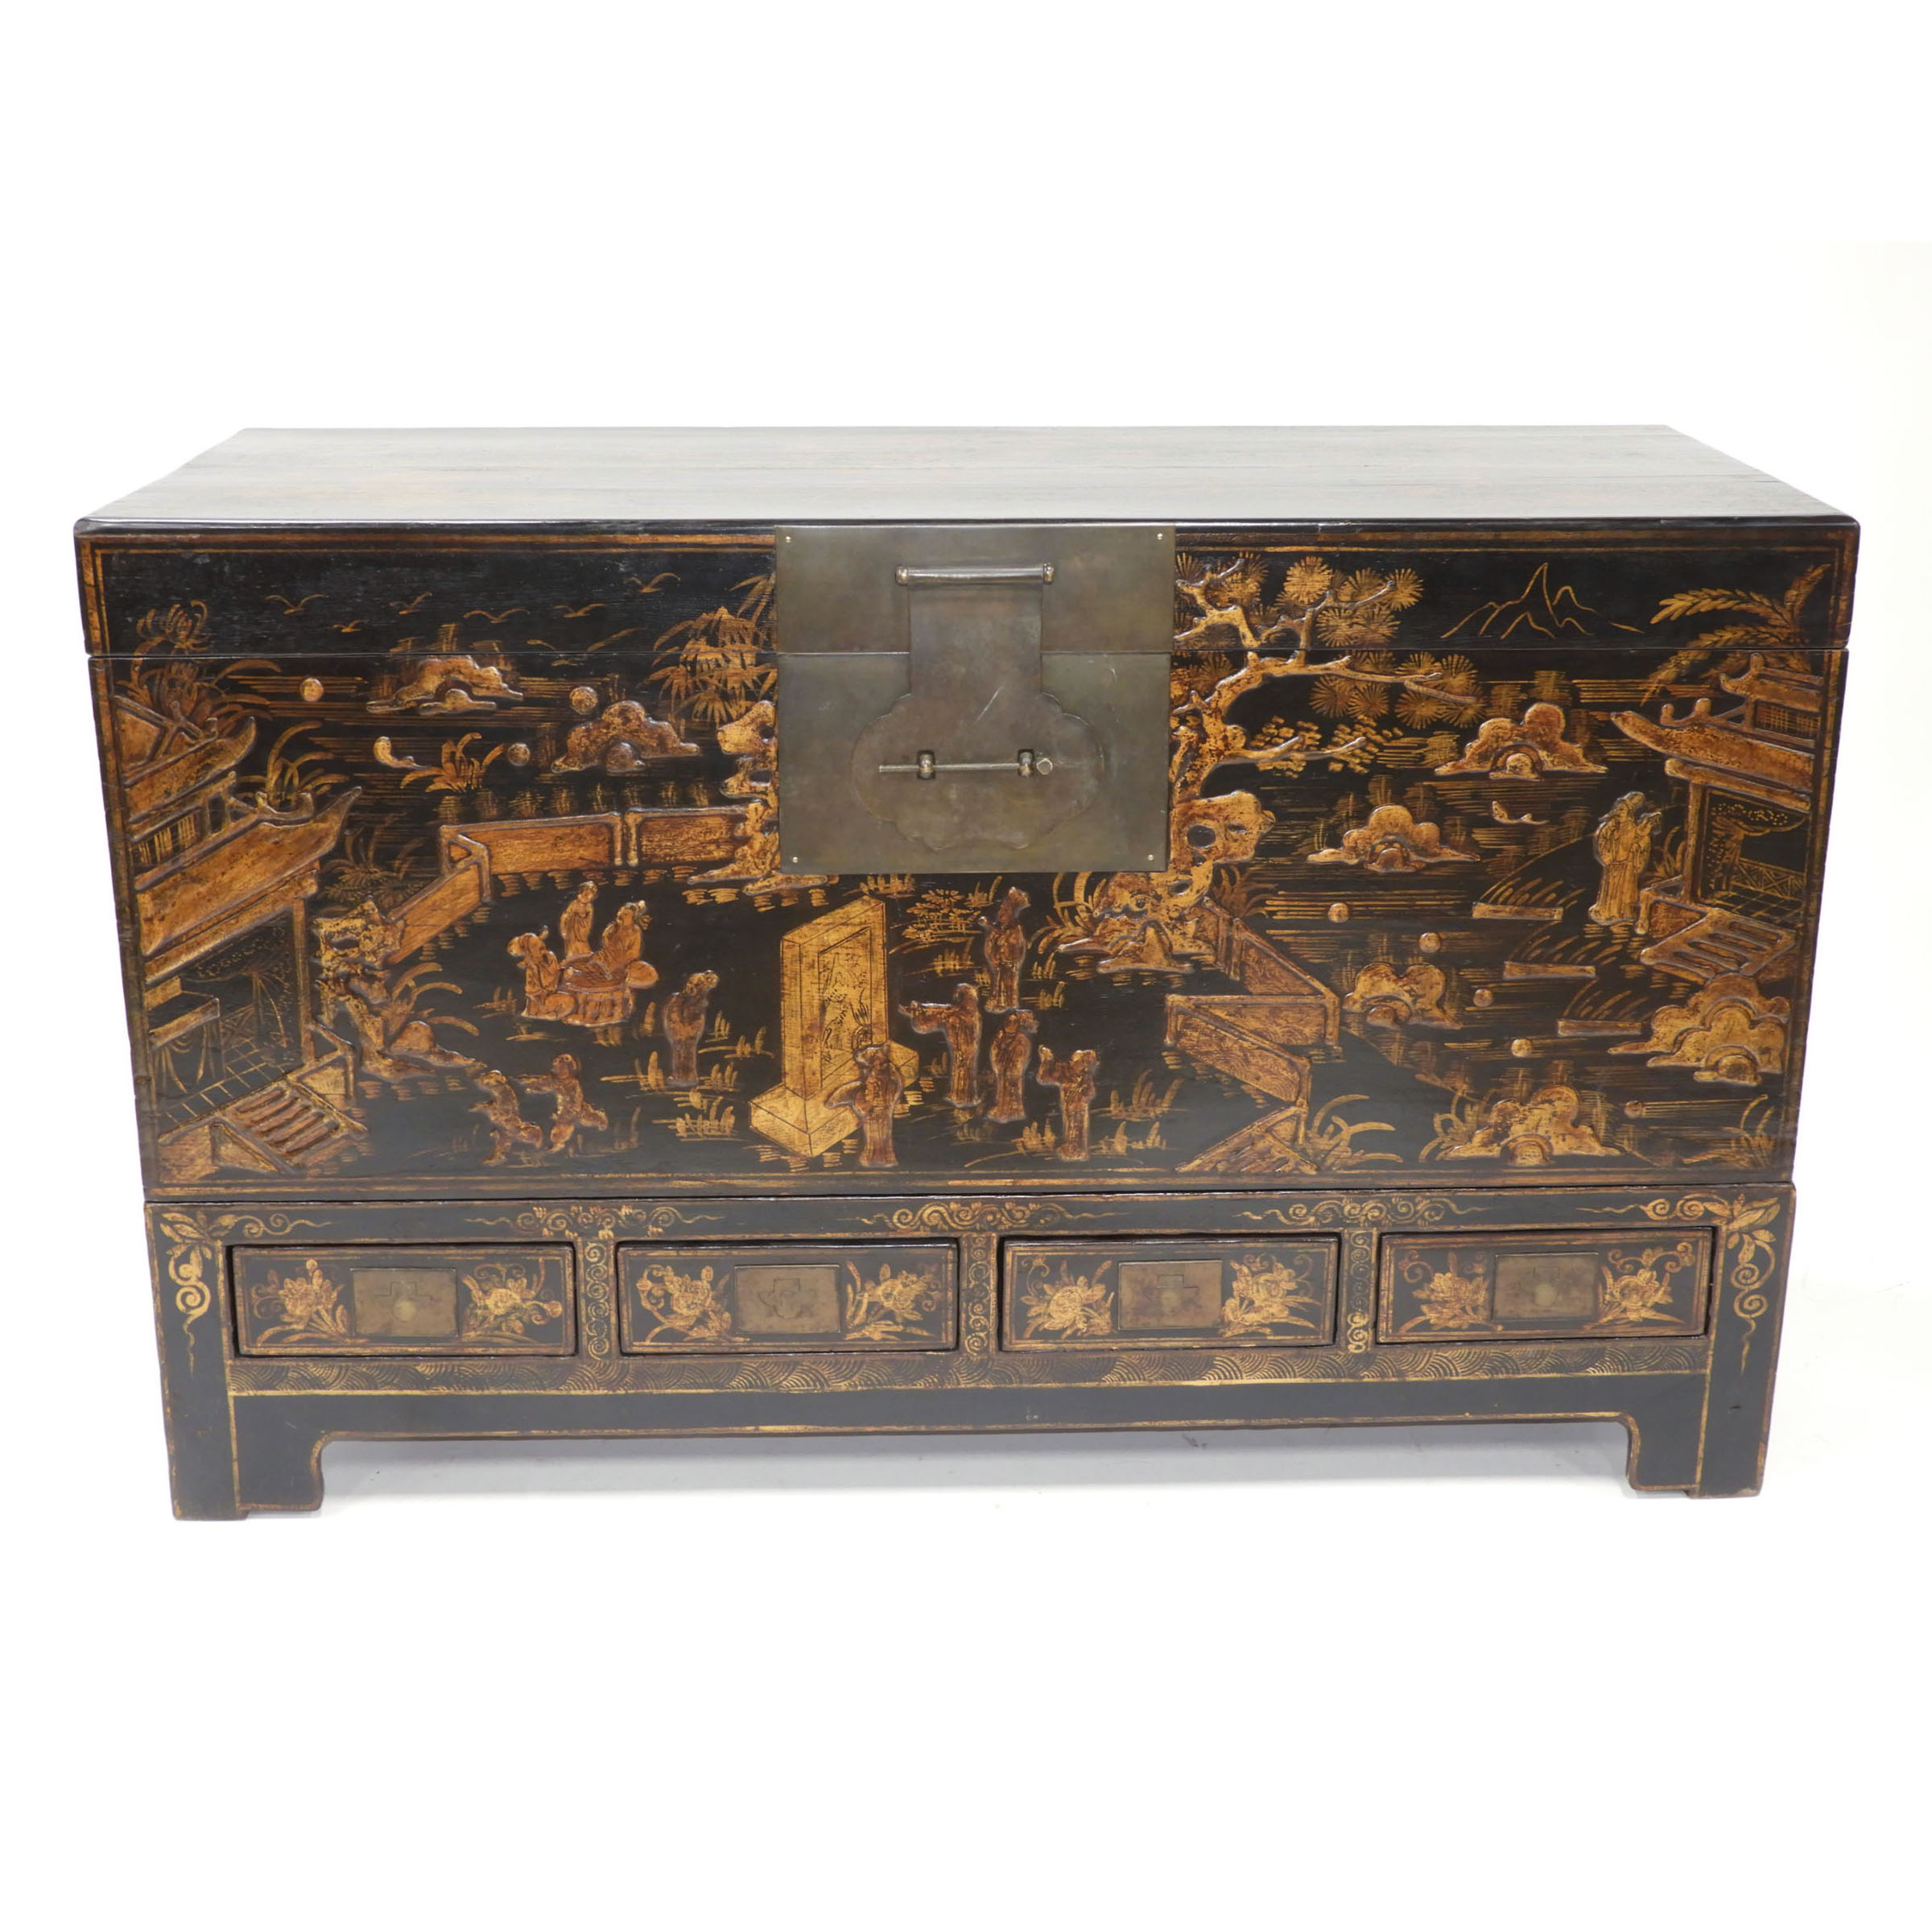 A Large Chinese Gilt and Black Lacquer Storage Chest, Early to Mid 20th Century